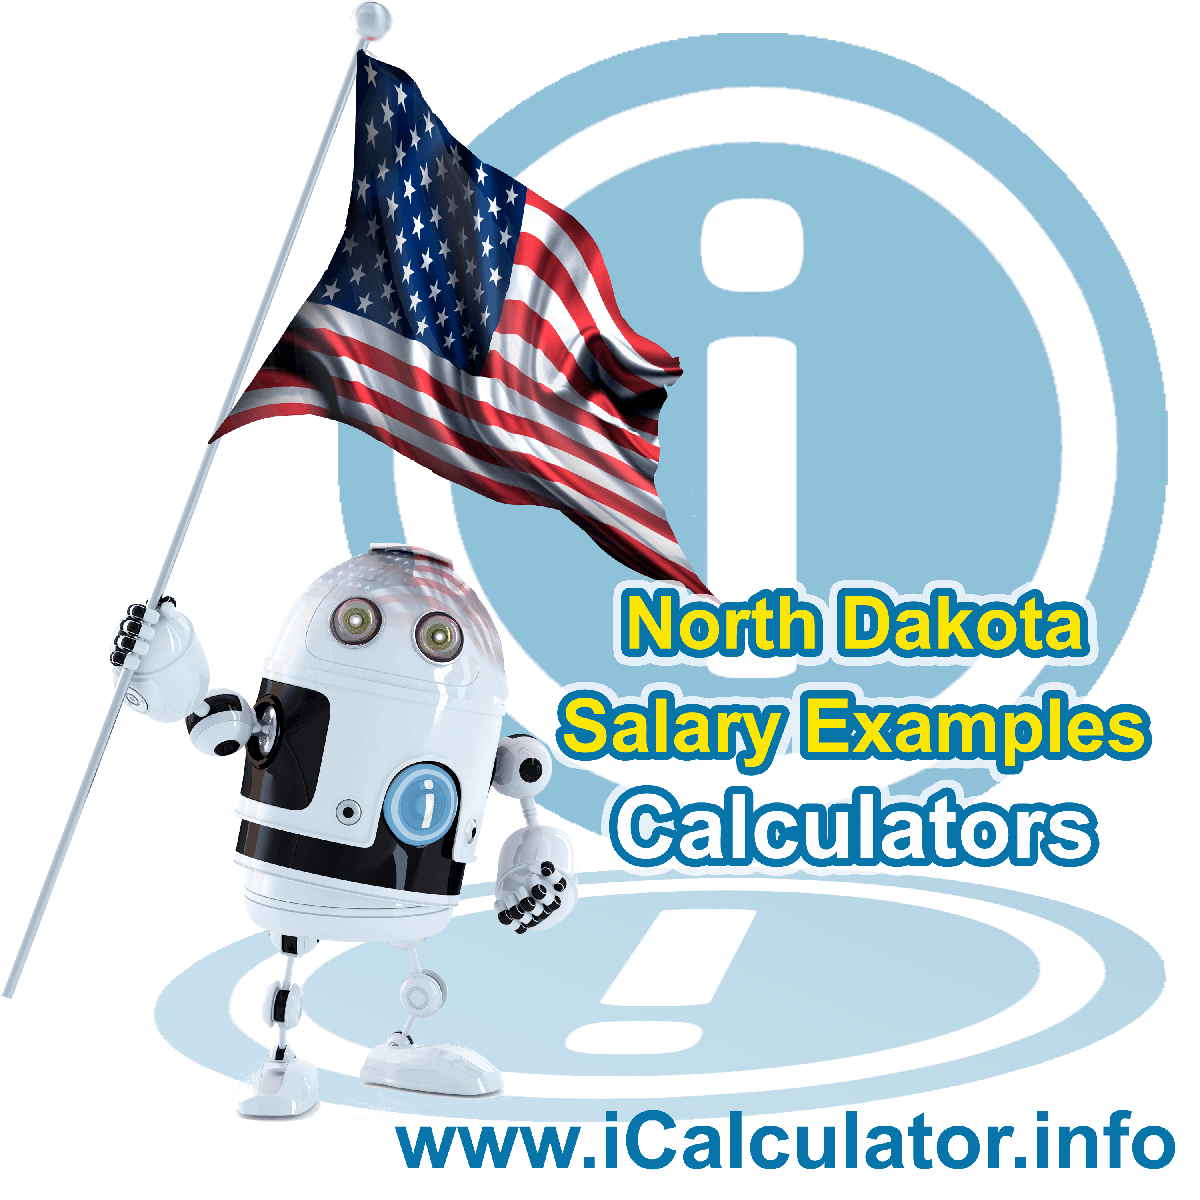 North Dakota Salary Example for $ 230,000.00 in 2023 | iCalculator™ | $ 230,000.00 salary example for employee and employer paying North Dakota State tincome taxes. Detailed salary after tax calculation including North Dakota State Tax, Federal State Tax, Medicare Deductions, Social Security, Capital Gains and other income tax and salary deductions complete with supporting North Dakota state tax tables 